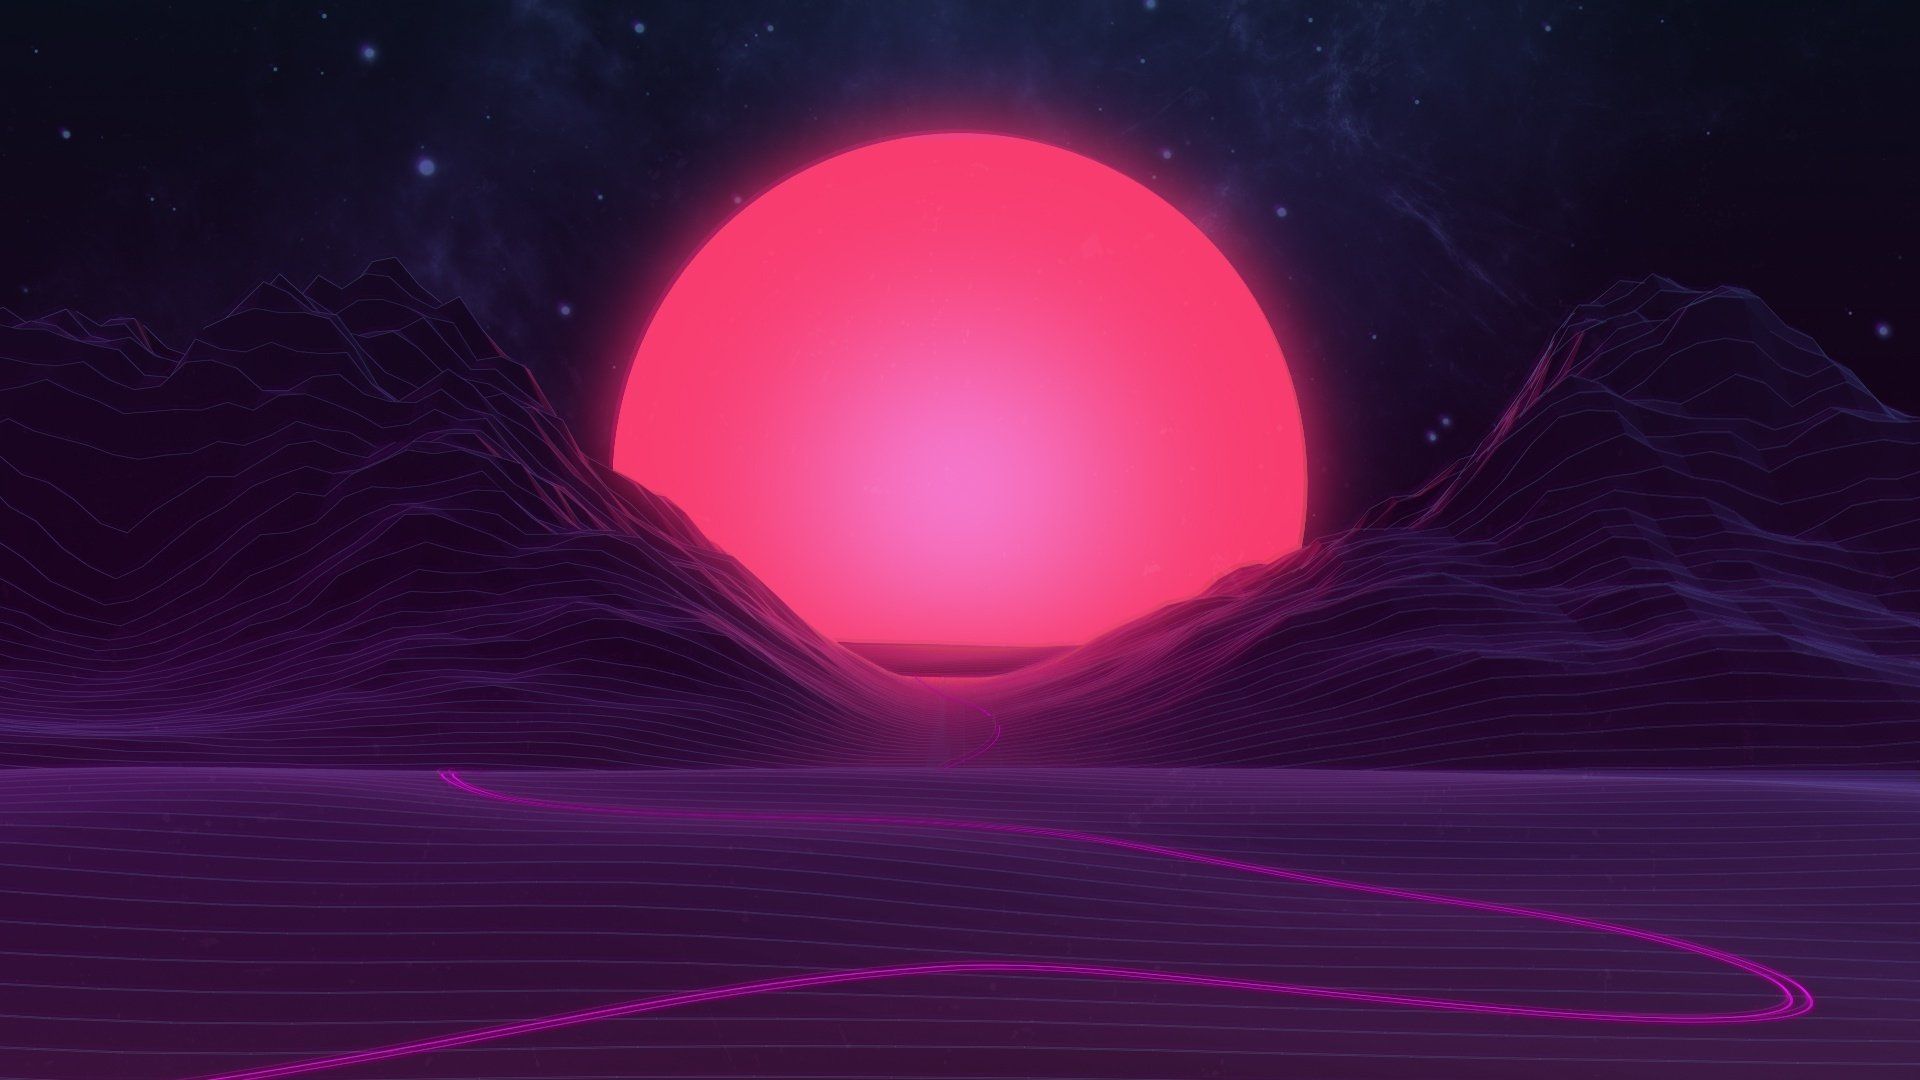 A pink and purple sunset over a grid landscape - Neon purple, clean